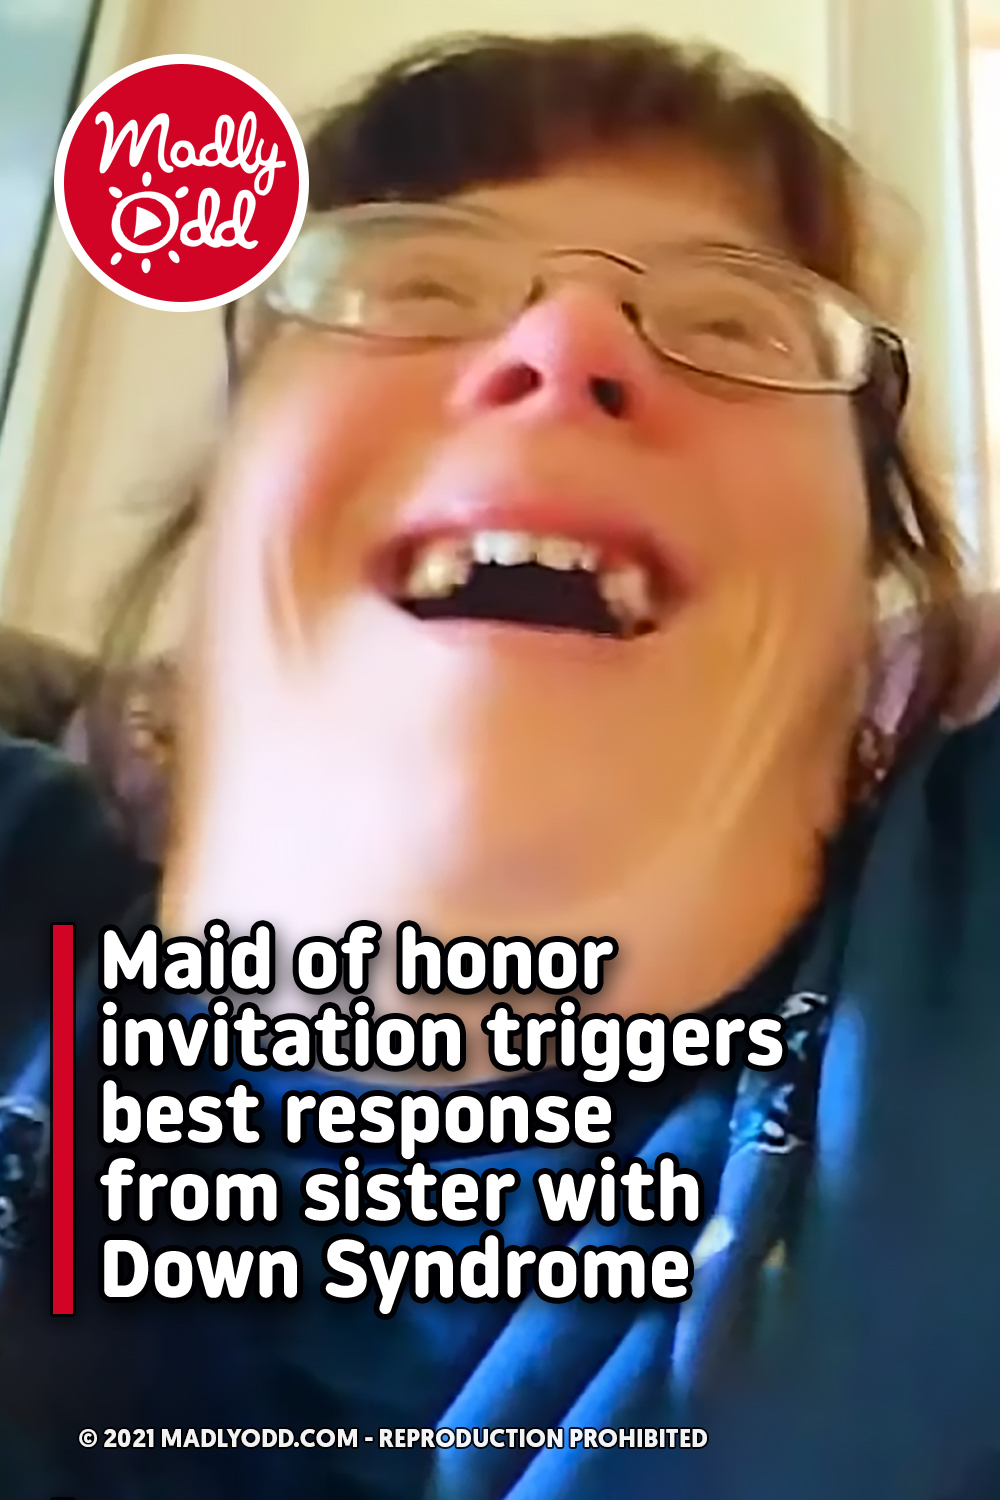 Maid of honor invitation triggers best response from sister with Down Syndrome